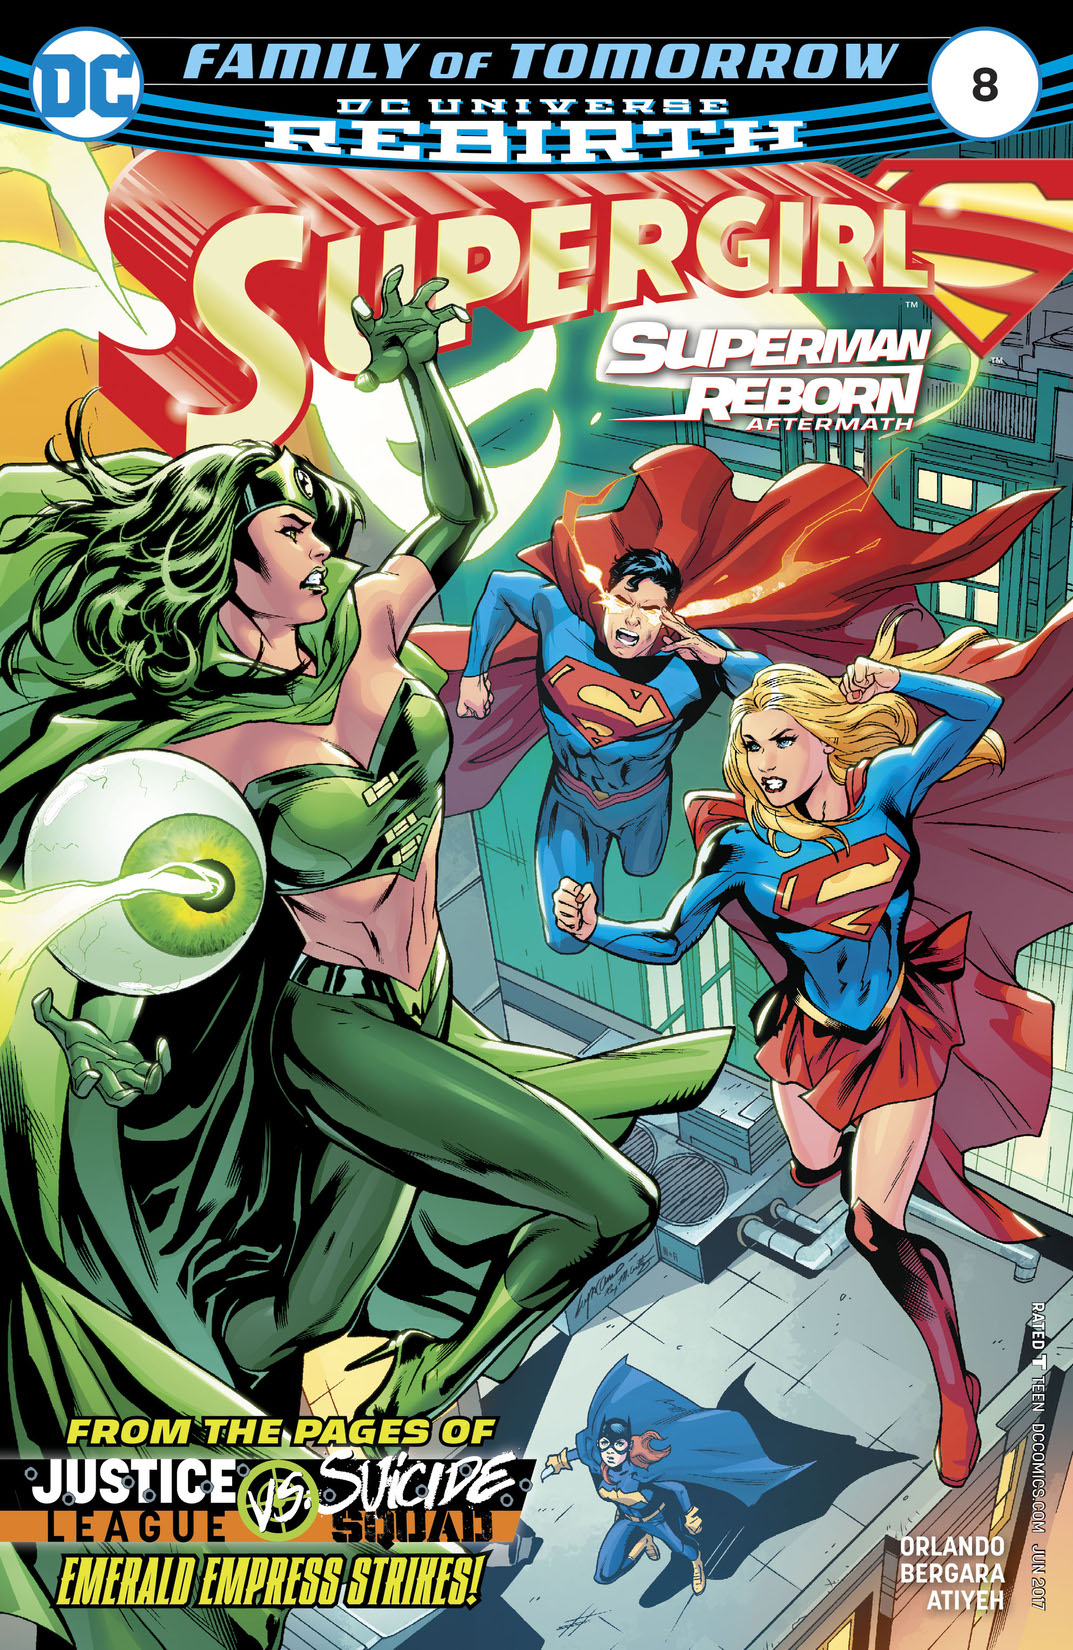 Supergirl (2016-) #8 preview images